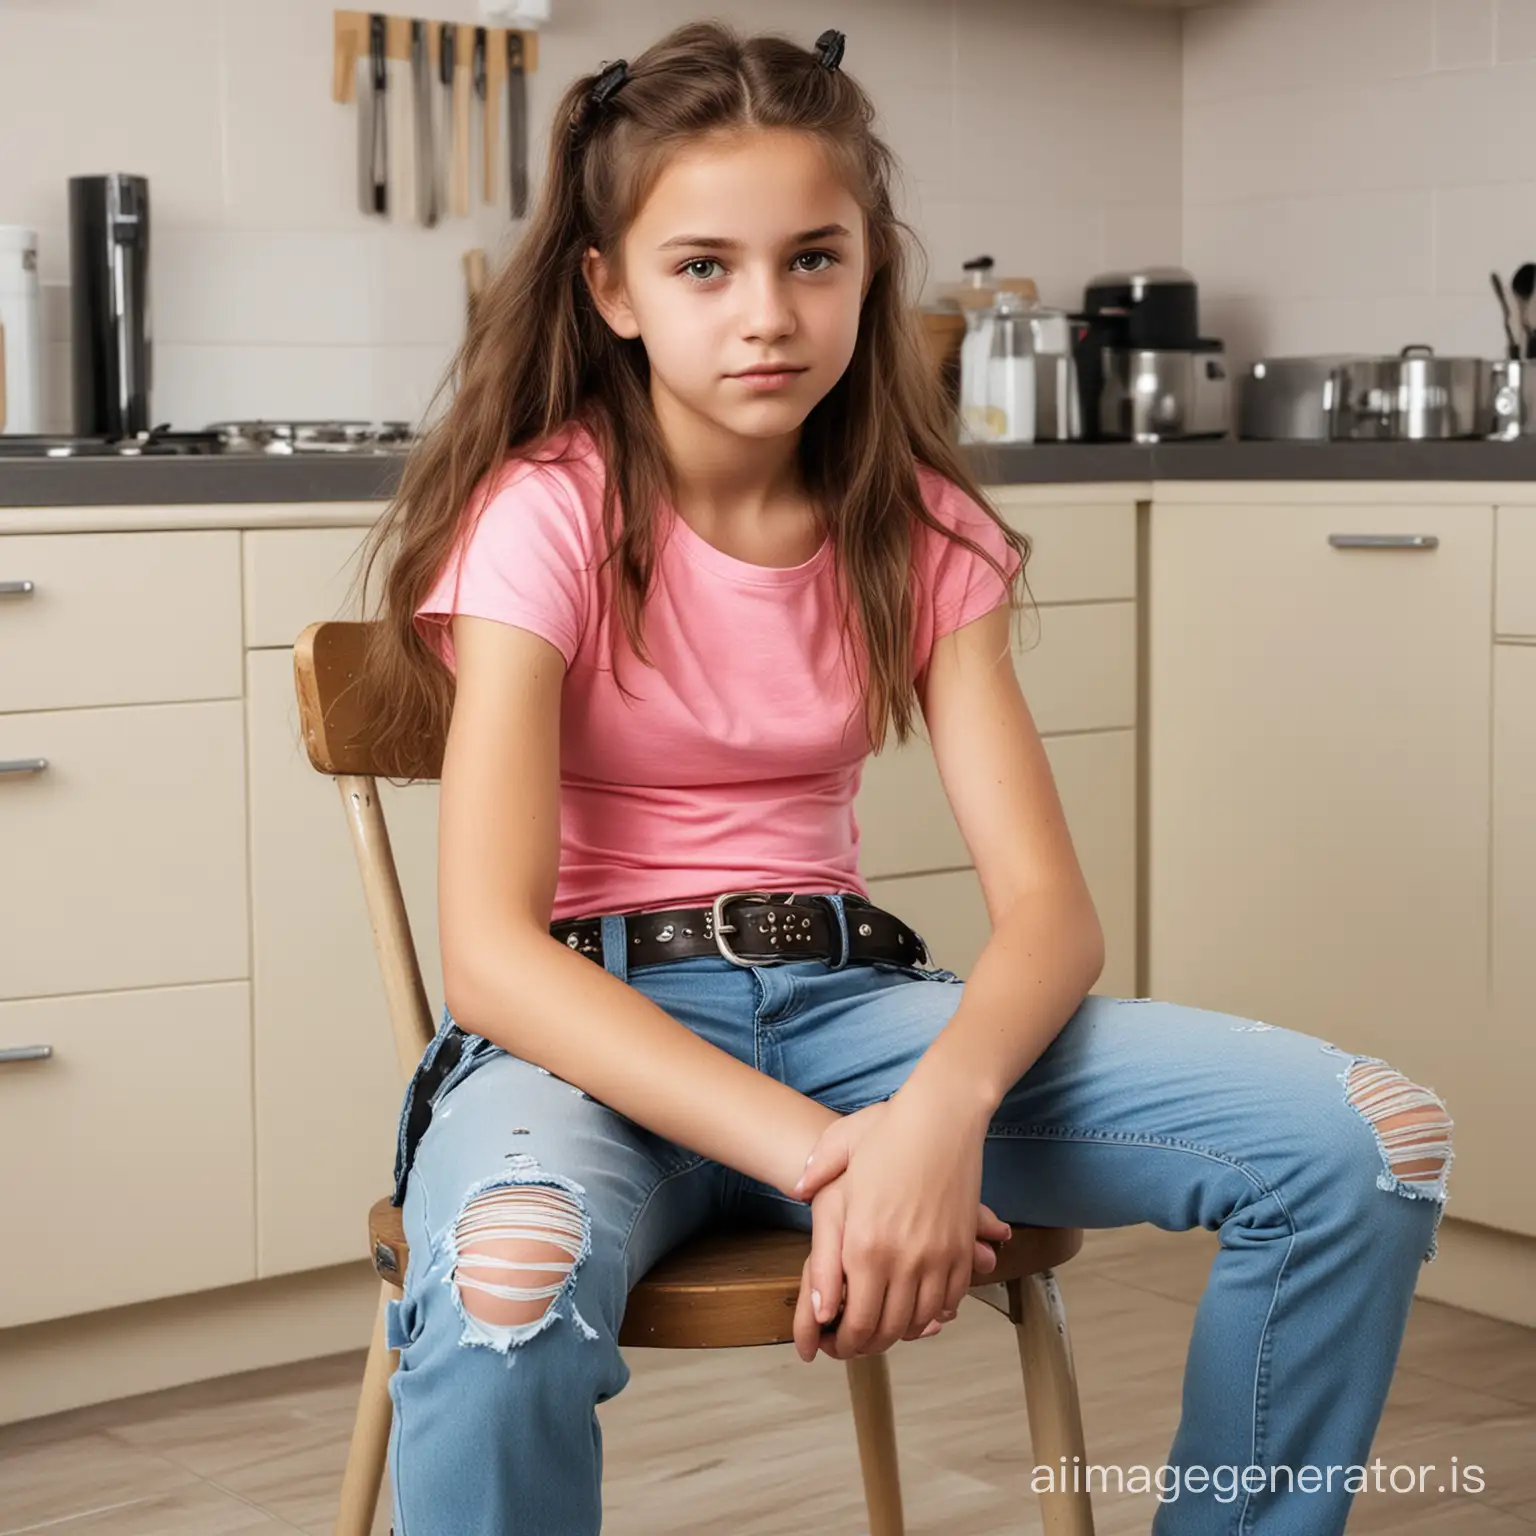 Serious-Teenage-Girl-in-Ripped-Jeans-Sitting-in-Kitchen